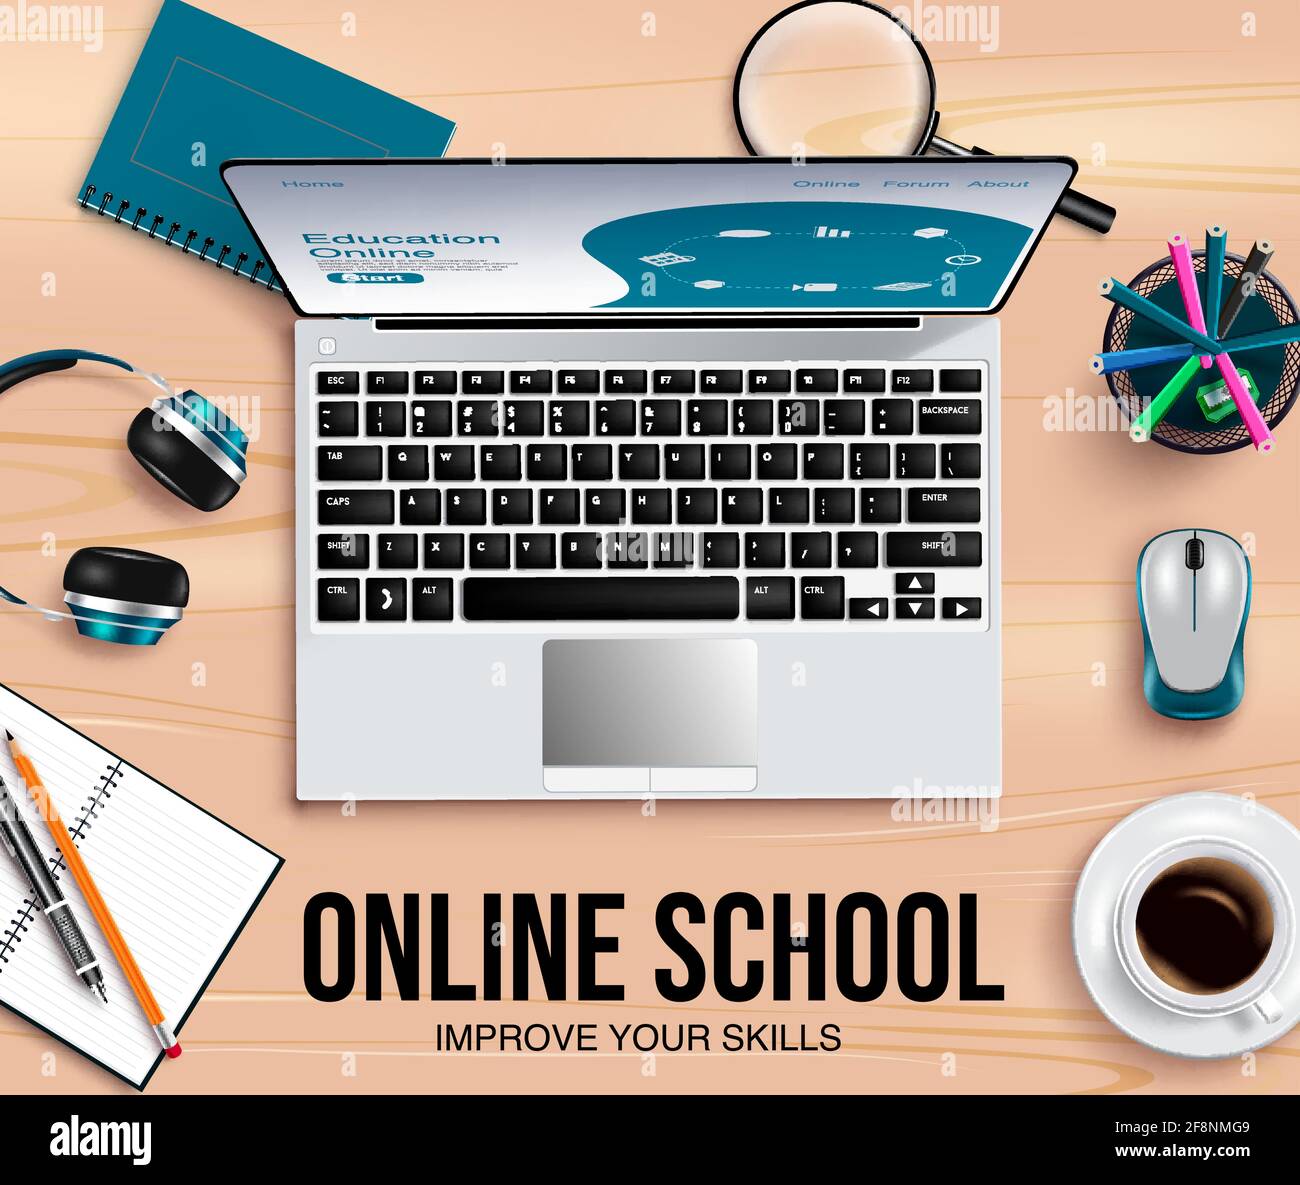 Online school education vector banner background. Online school improve yor  skills text with digital tools like laptop, mouse and headphones elements  Stock Vector Image & Art - Alamy